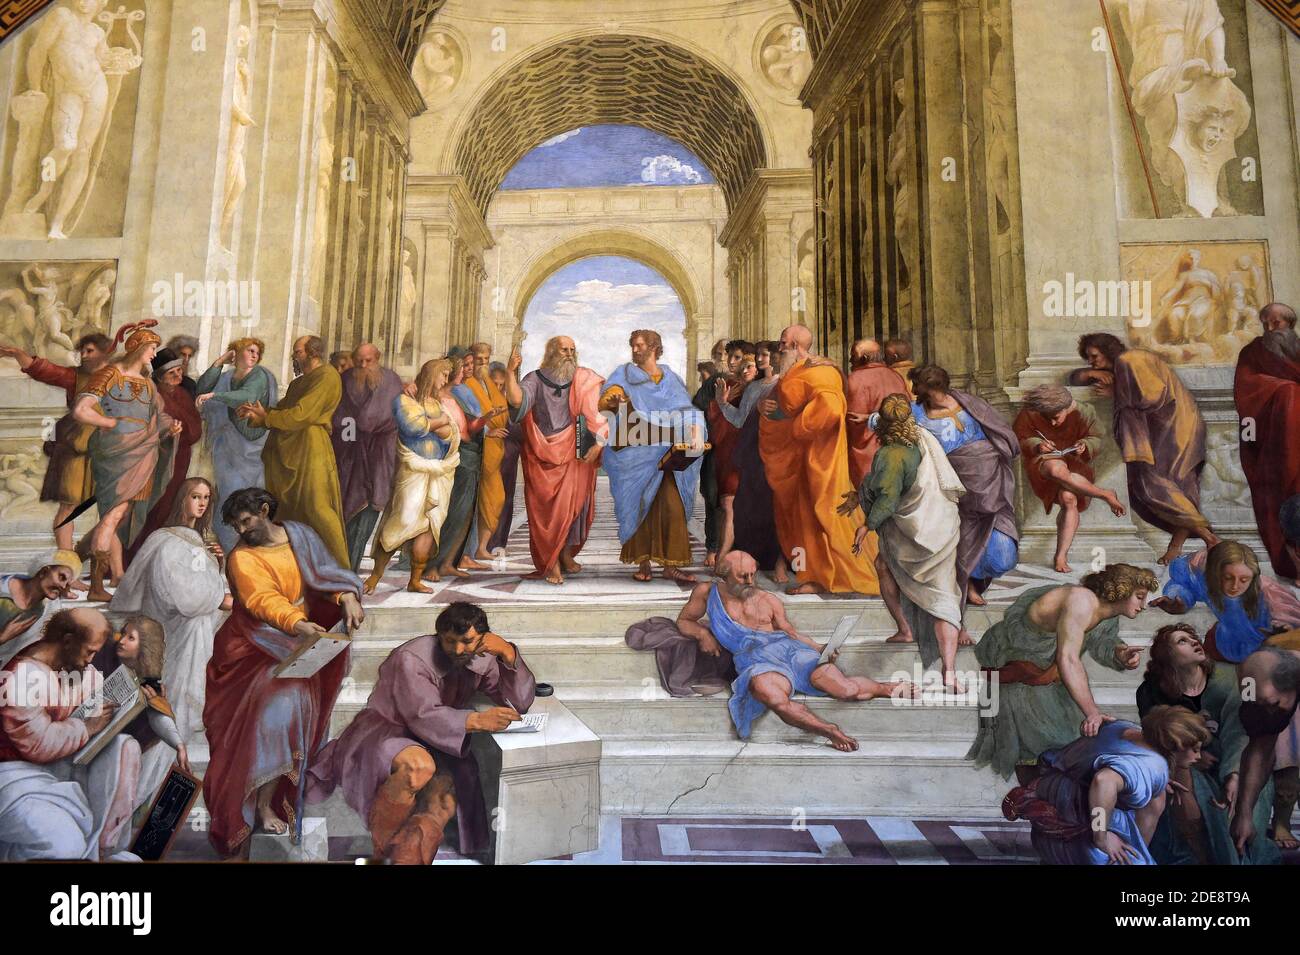 The School of Athens by Raphael(Raffaello Sanzio 1483-1520) Painted between 1509 and 1511 as a part of Raphael's commission to decorate the rooms now known as the Stanze di Raffaello, in the Apostolic Palace in the Vatican. Center : Plato,Aristotle. Sitting: L to R : Pythagoras,Heraclitus,Diogenes of Sinope Raphael Rooms,Room of the Signature. Vatican, 2018. - The Vatican Museums contain masterpieces of painting, sculpture and other works of art collected by the popes through the centuries. Through their diversity and richness, the Vatican museums rank among the first great museums in the worl Stock Photo